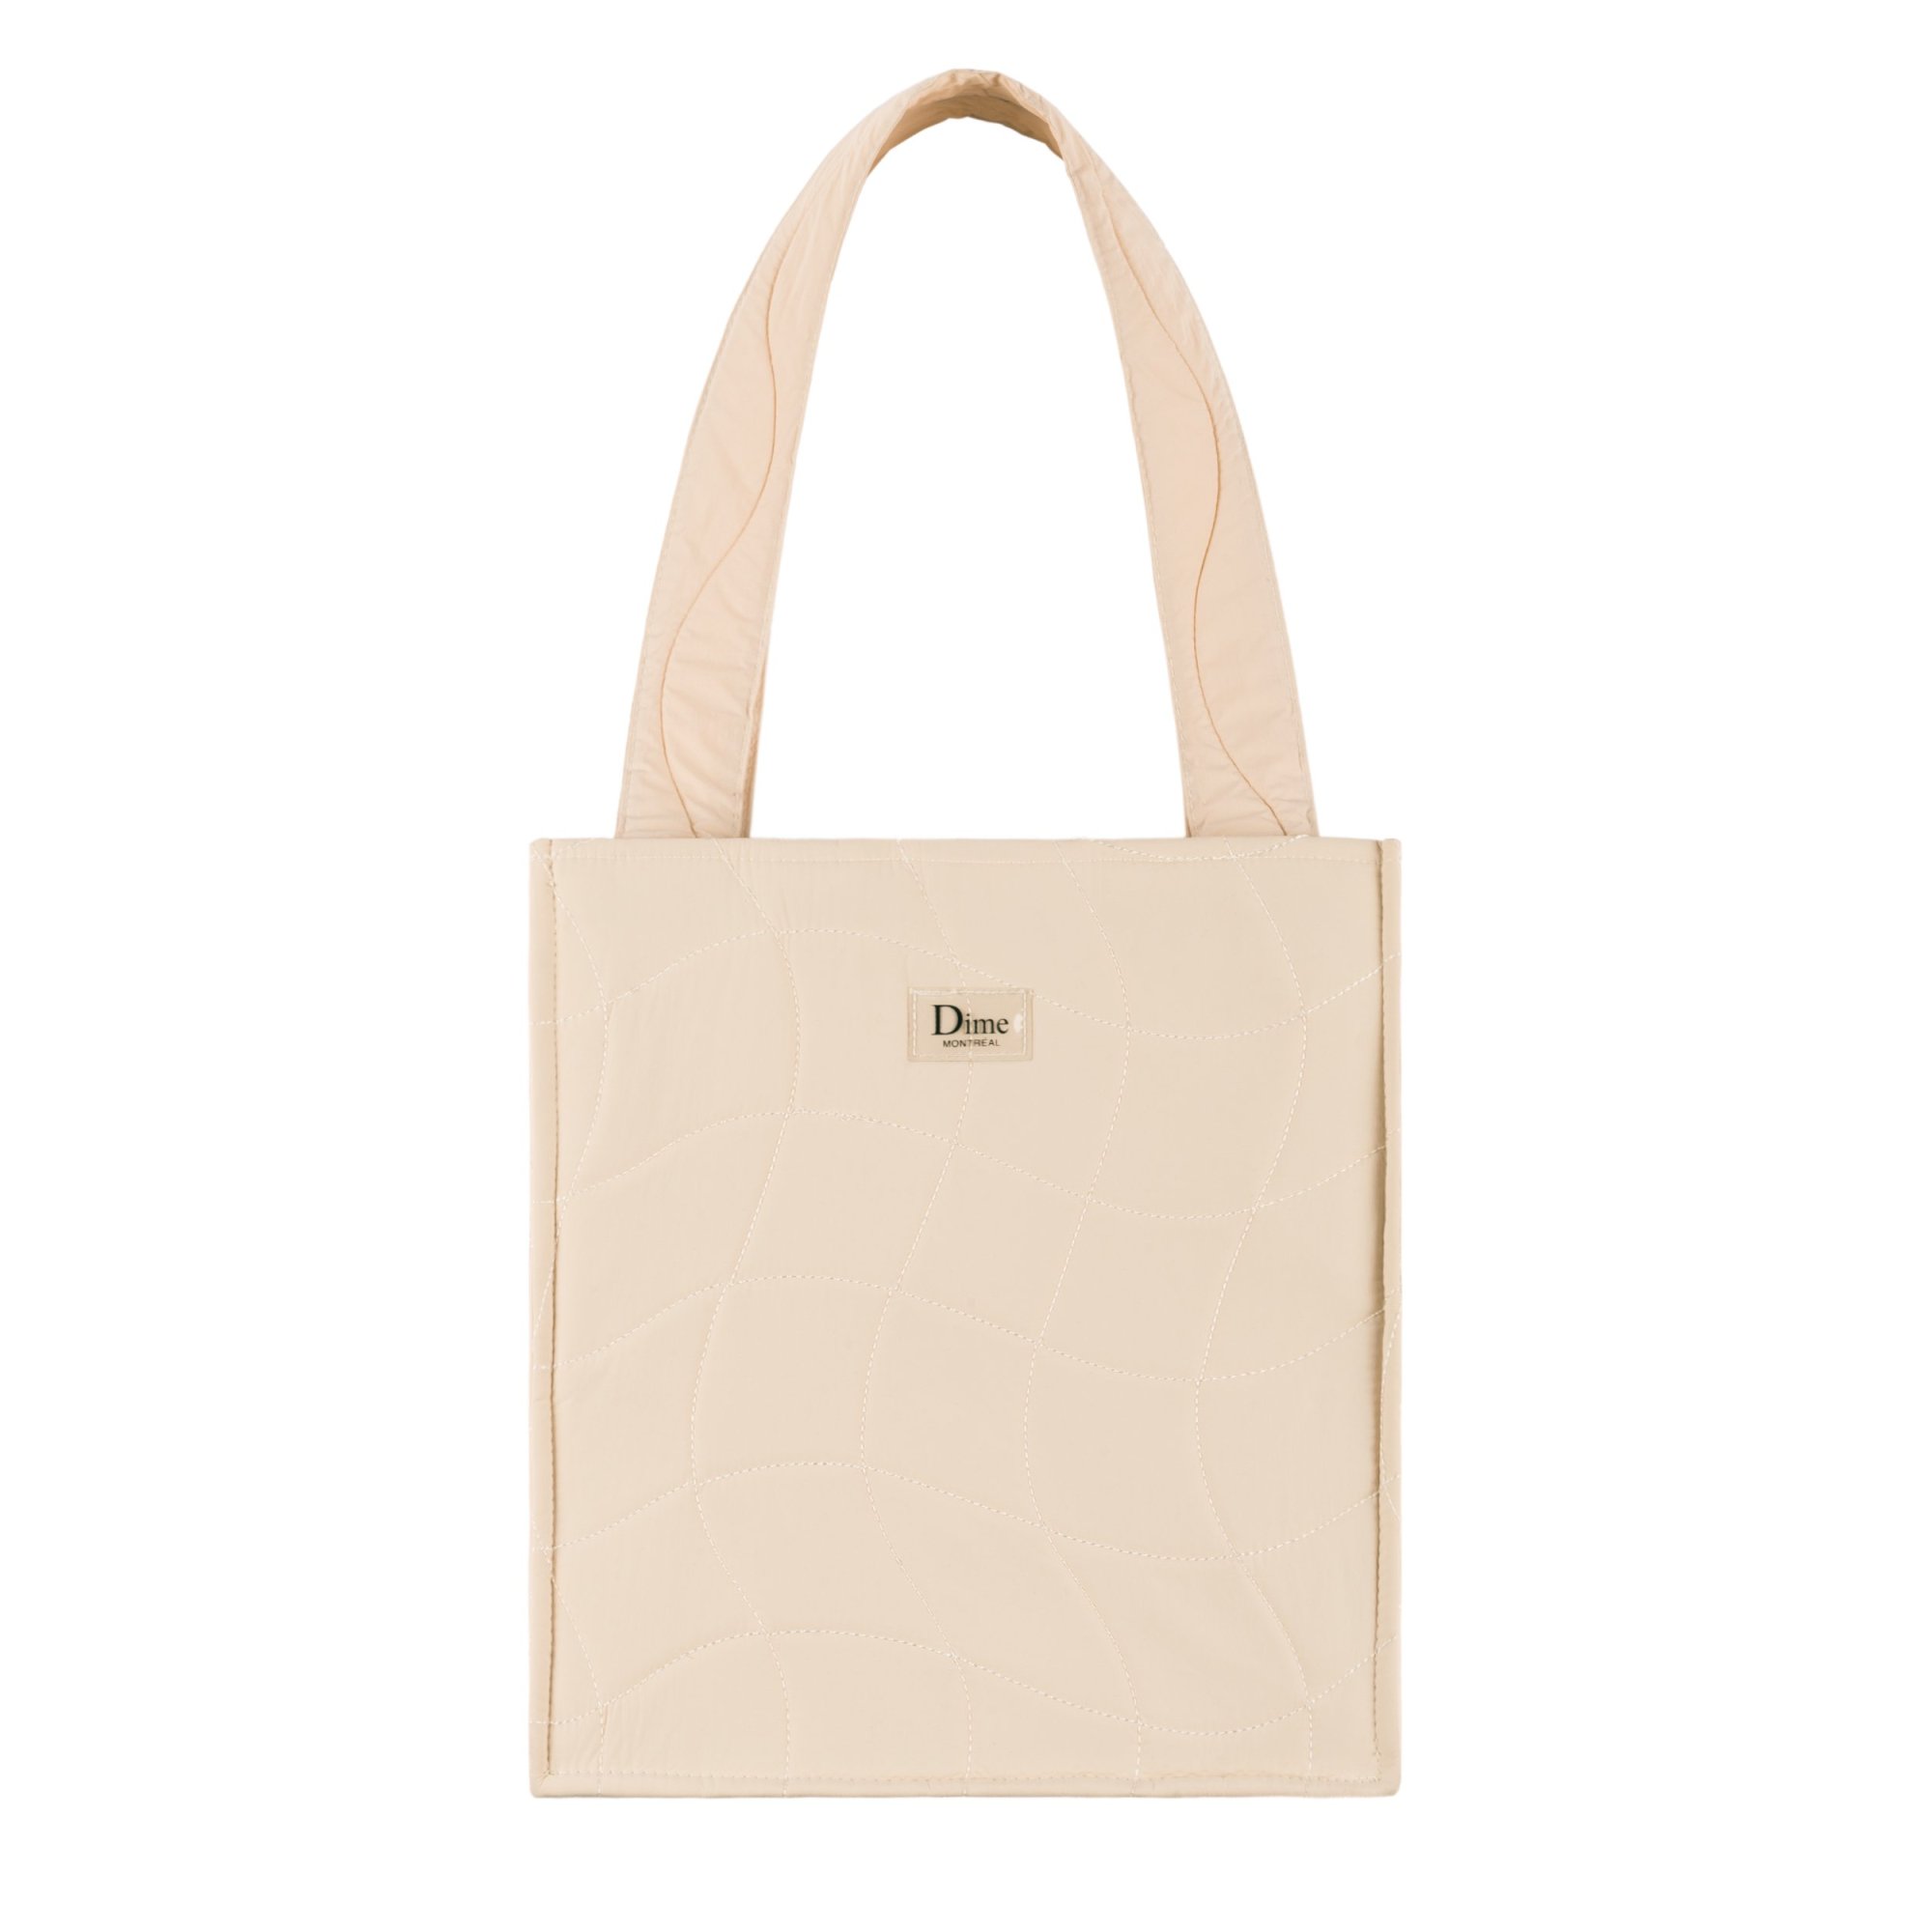 DIME<br>QUILTED TOTE BAG
<br>